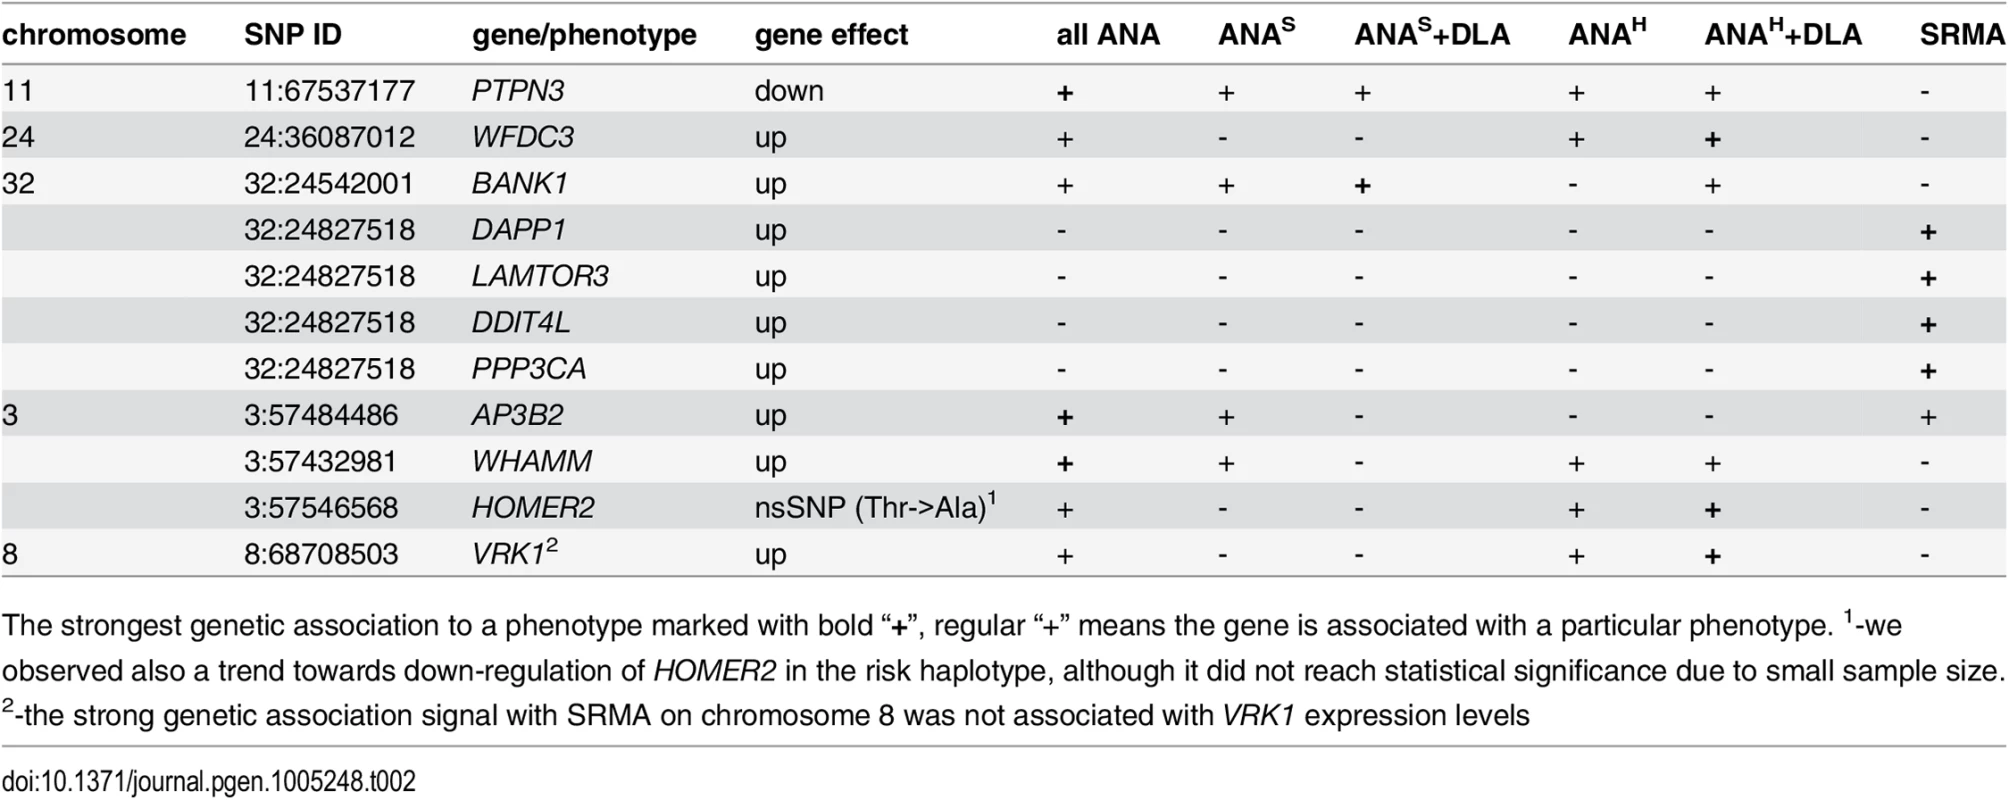 Genes associated with IMRD and SRMA phenotypes.